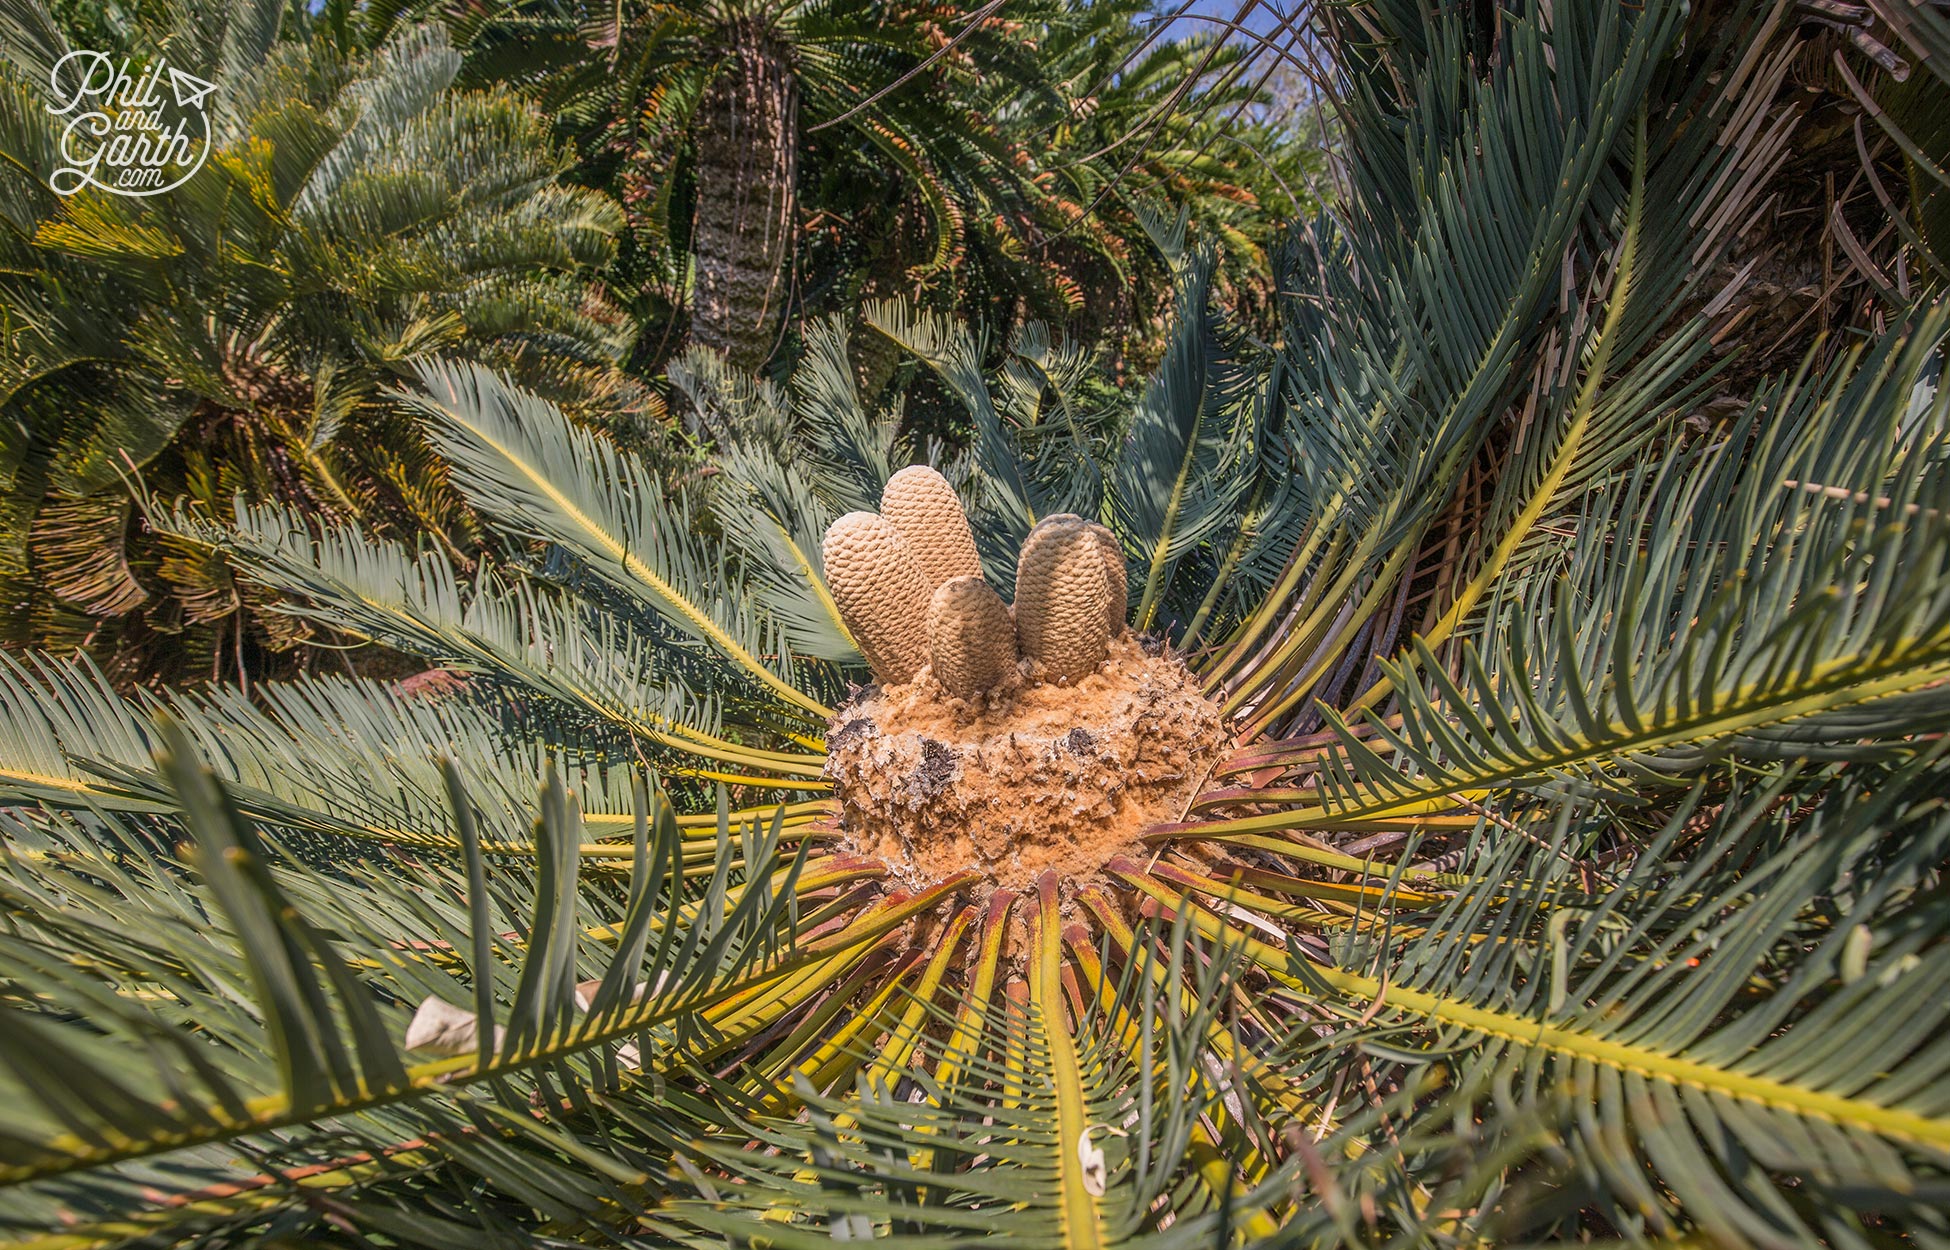 Plants the dinosaurs saw - this is a Cycad, often referred to as a living fossil